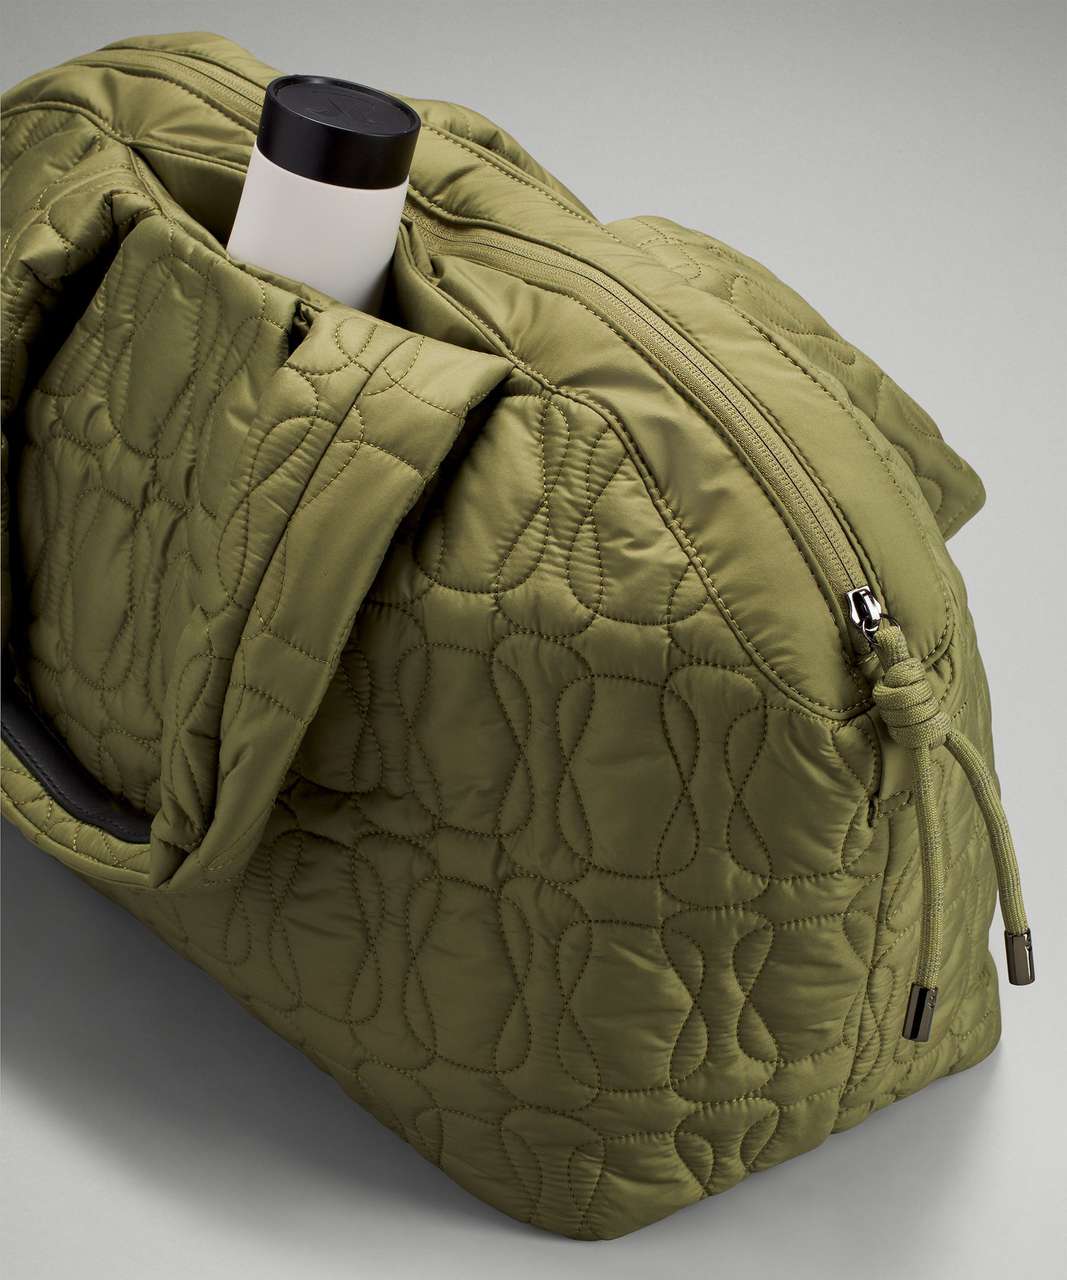 Lululemon Quilted Embrace Yoga Bag In Pink Taupe/icing Blue/rhino Grey |  ModeSens